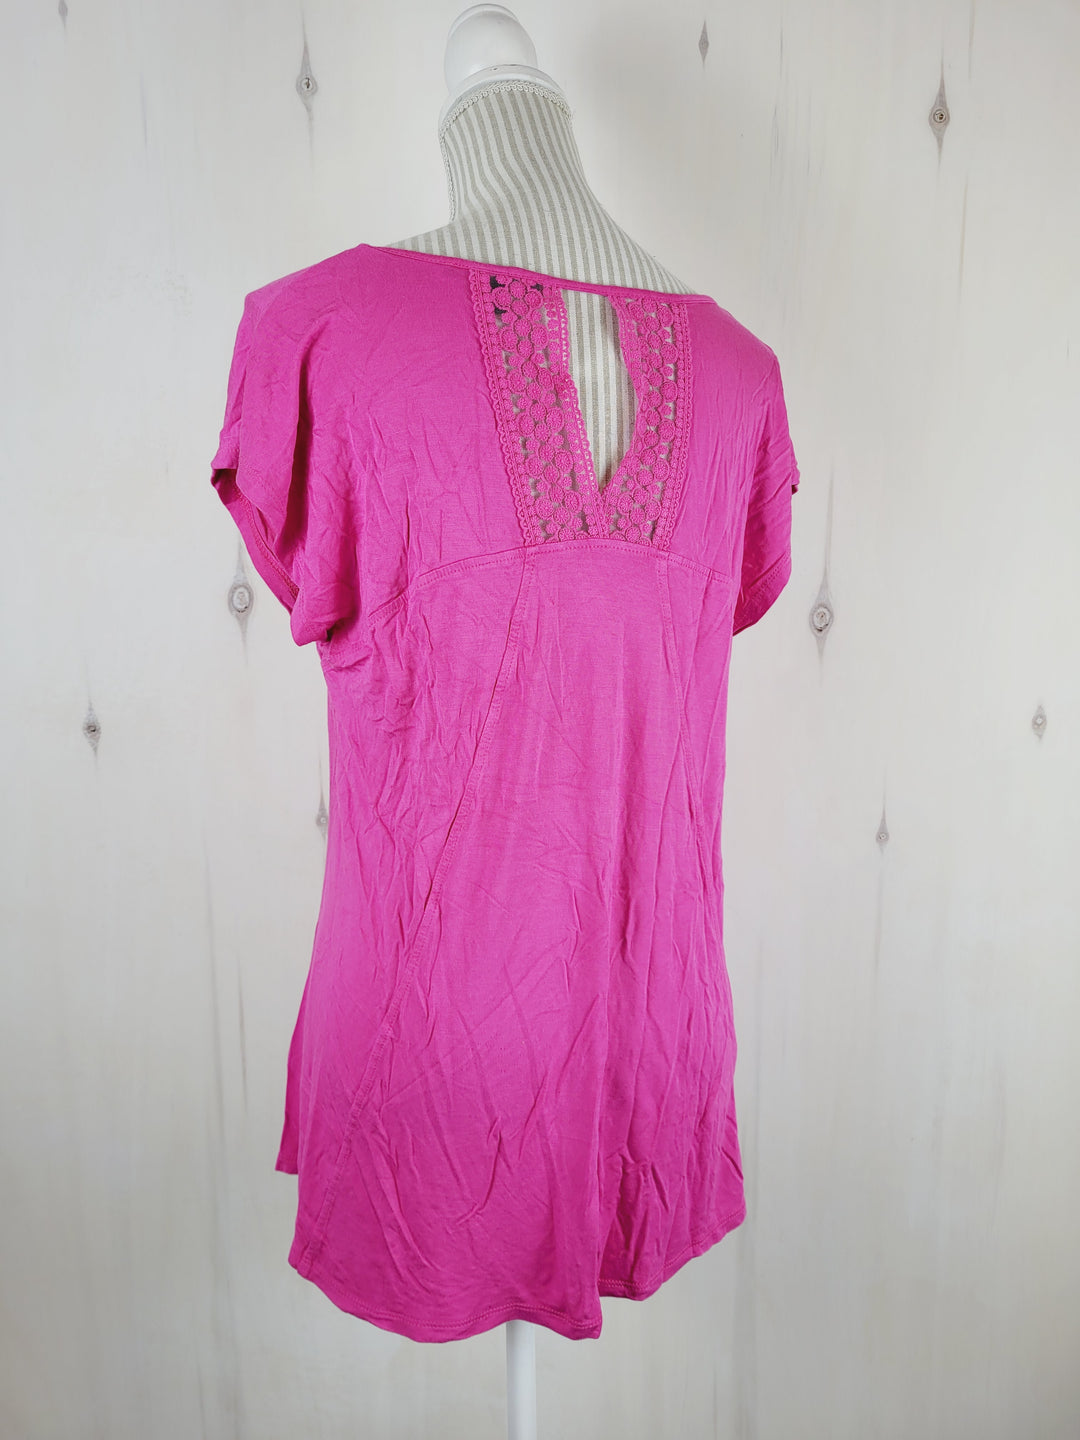 CABLE & GAUGE PINK TOP WITH BACK LACE DETAIL LADIES LARGE EUC